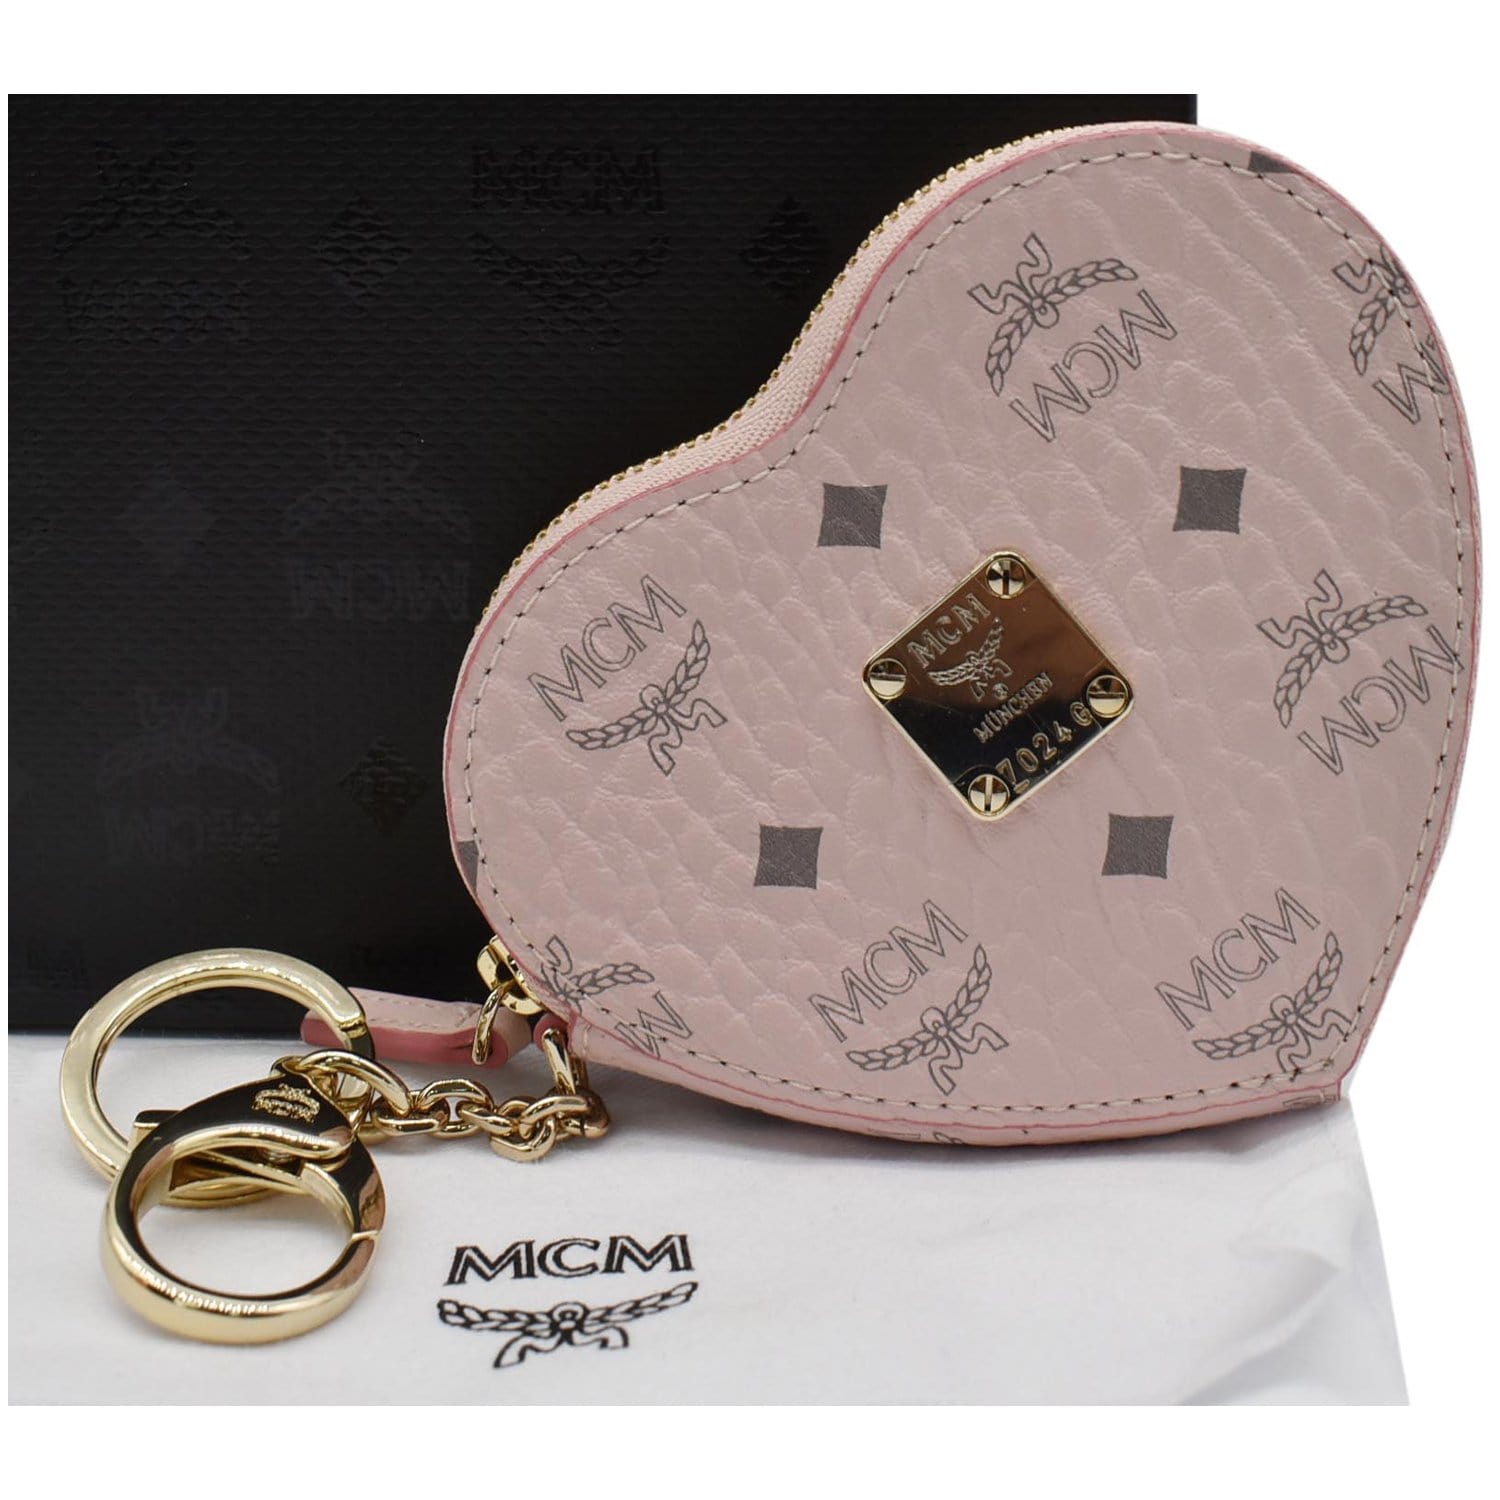 Used Mcm munchen rose gold pouch / WALLET - LEATHER